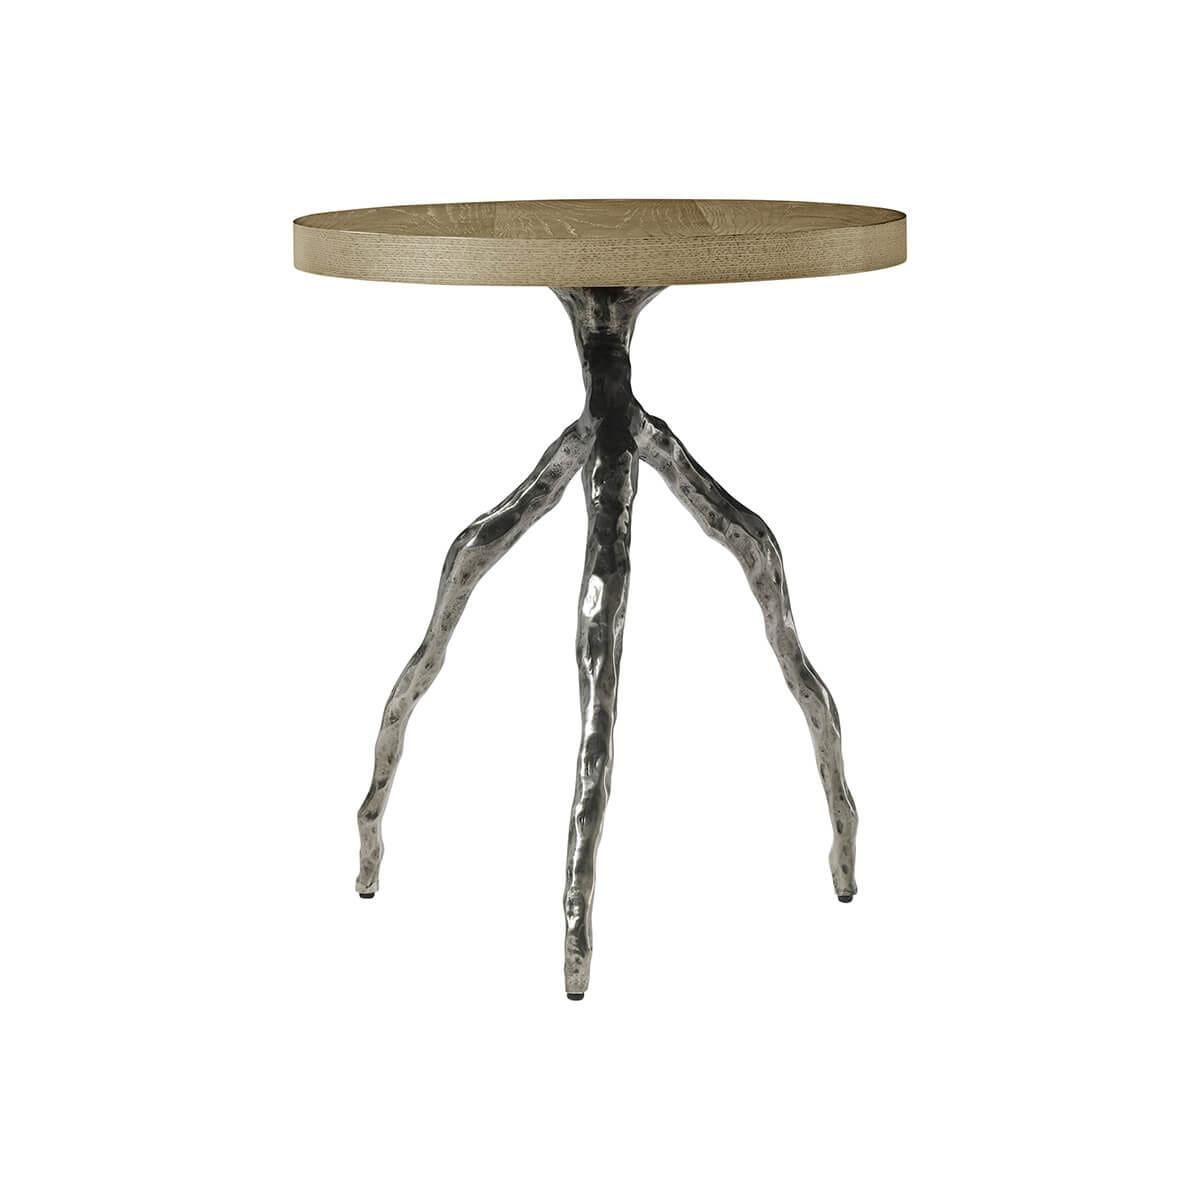 Organic Modern Modern Faux Bois Accent Table - Dune Finish For Sale